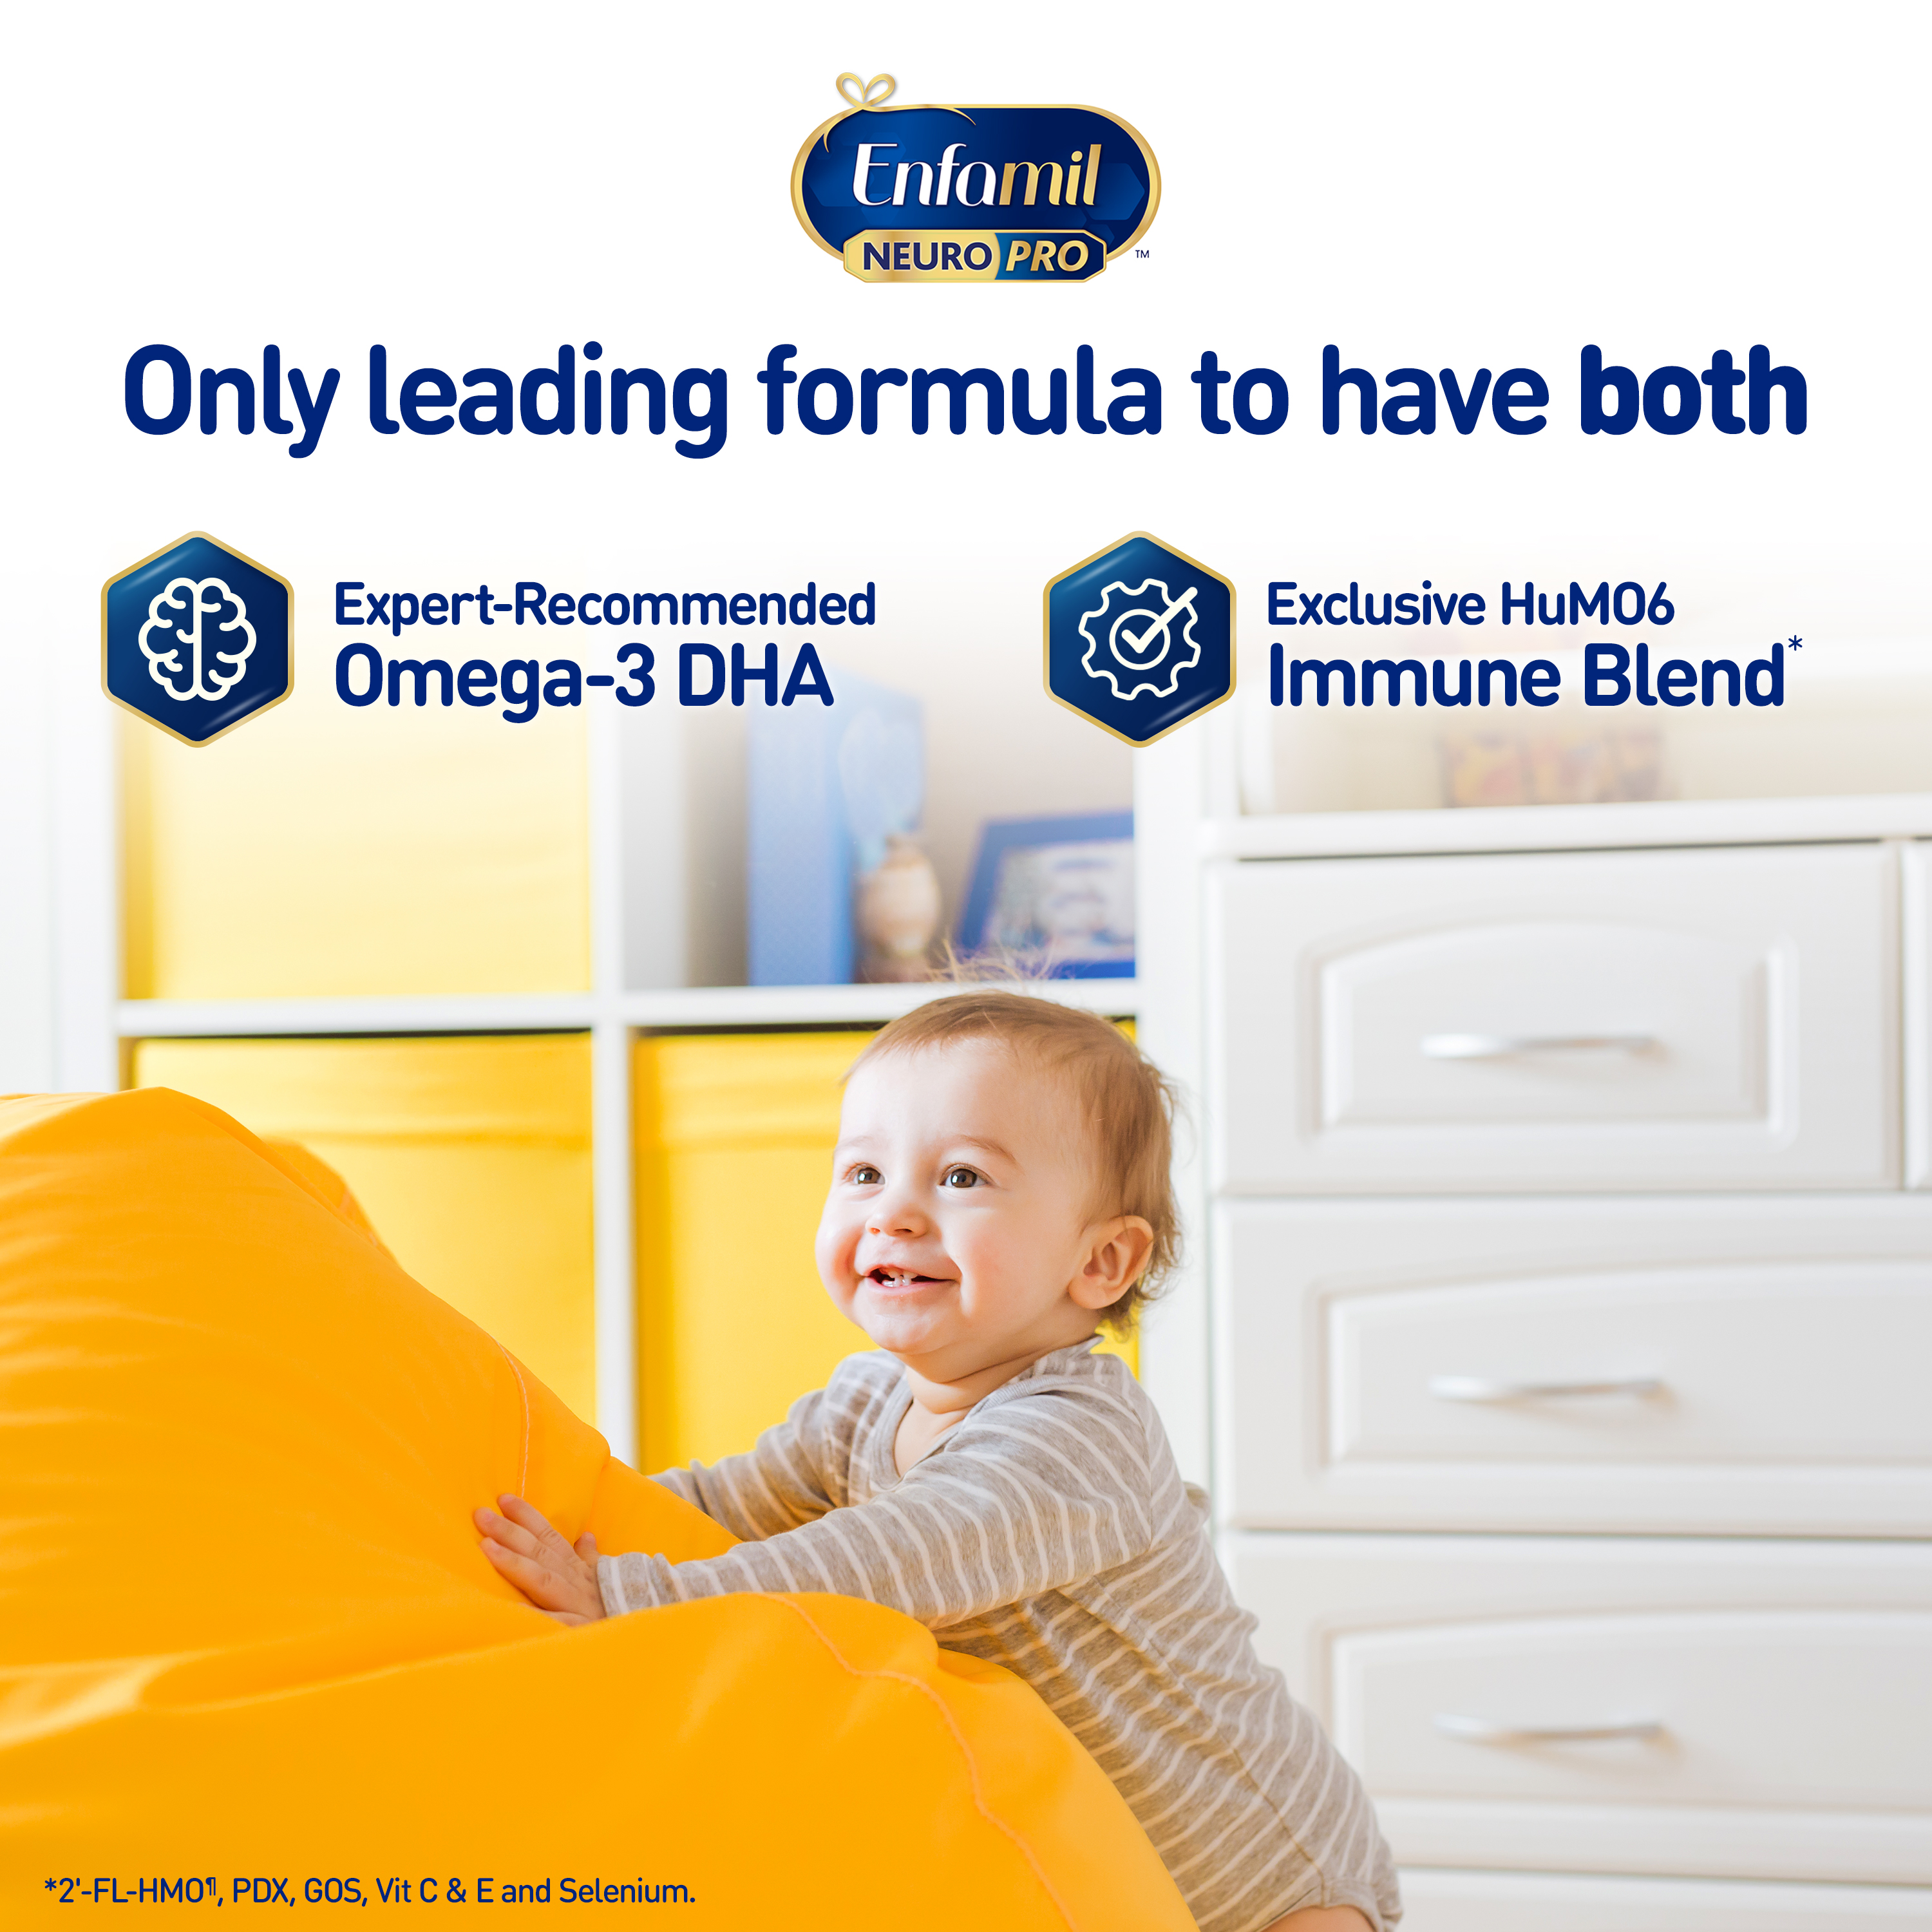 Enfamil NeuroPro Baby Formula, Milk-Based Infant Nutrition, MFGM* 5-Year Benefit, Expert-Recommended Brain-Building Omega-3 DHA, Exclusive HuMO6 Immune Blend, Non-GMO, 32 ​Fl Oz - image 5 of 13